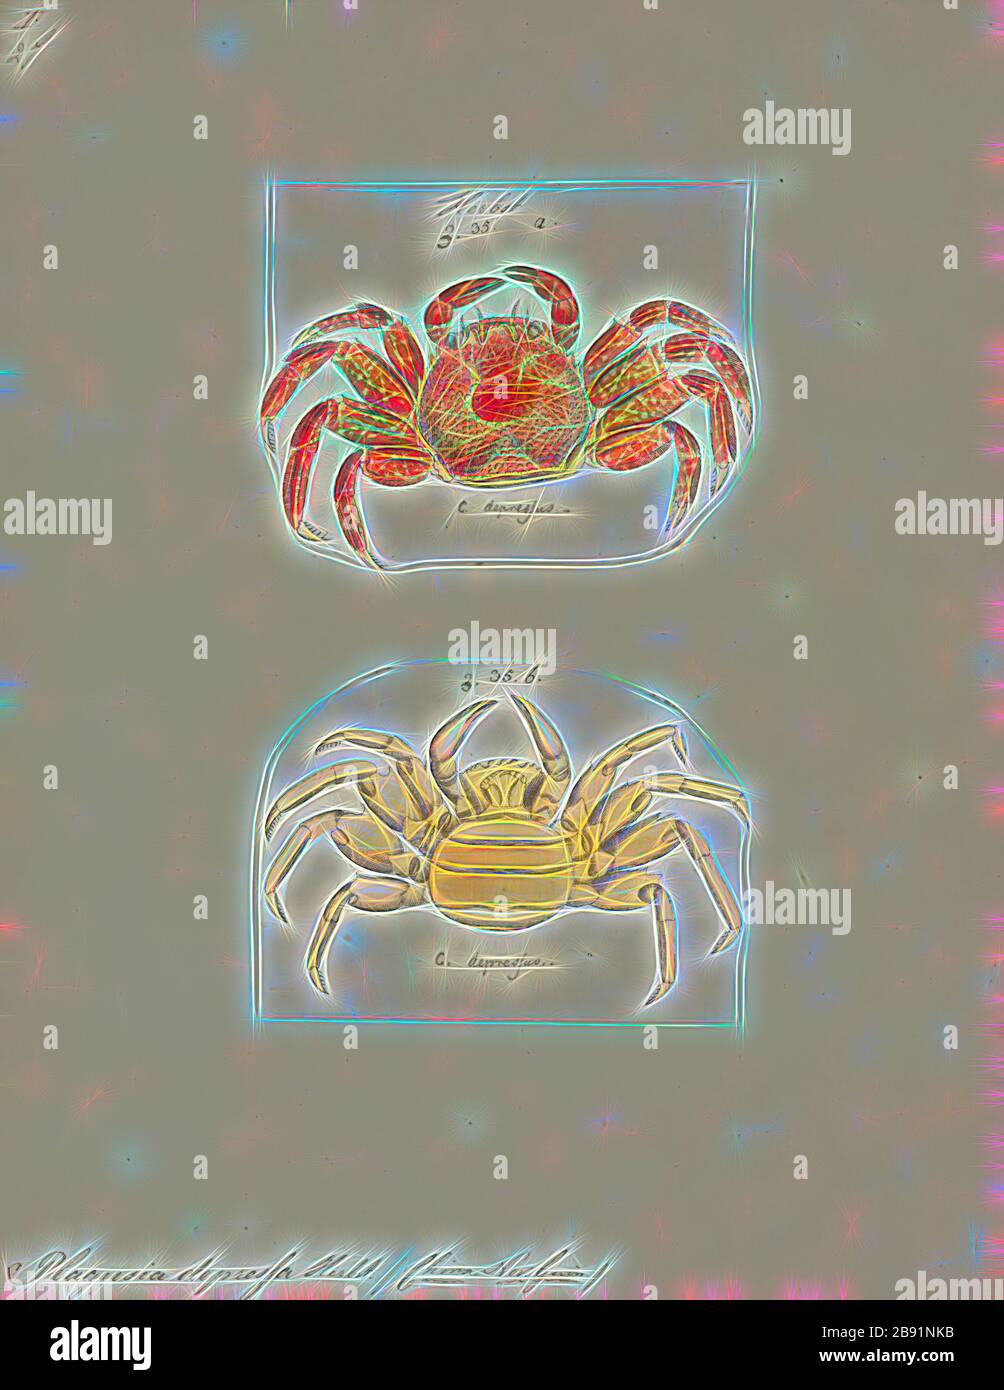 Plagusia depressa, Print, Tidal spray crab, Reimagined by Gibon, design of warm cheerful glowing of brightness and light rays radiance. Classic art reinvented with a modern twist. Photography inspired by futurism, embracing dynamic energy of modern technology, movement, speed and revolutionize culture. Stock Photo